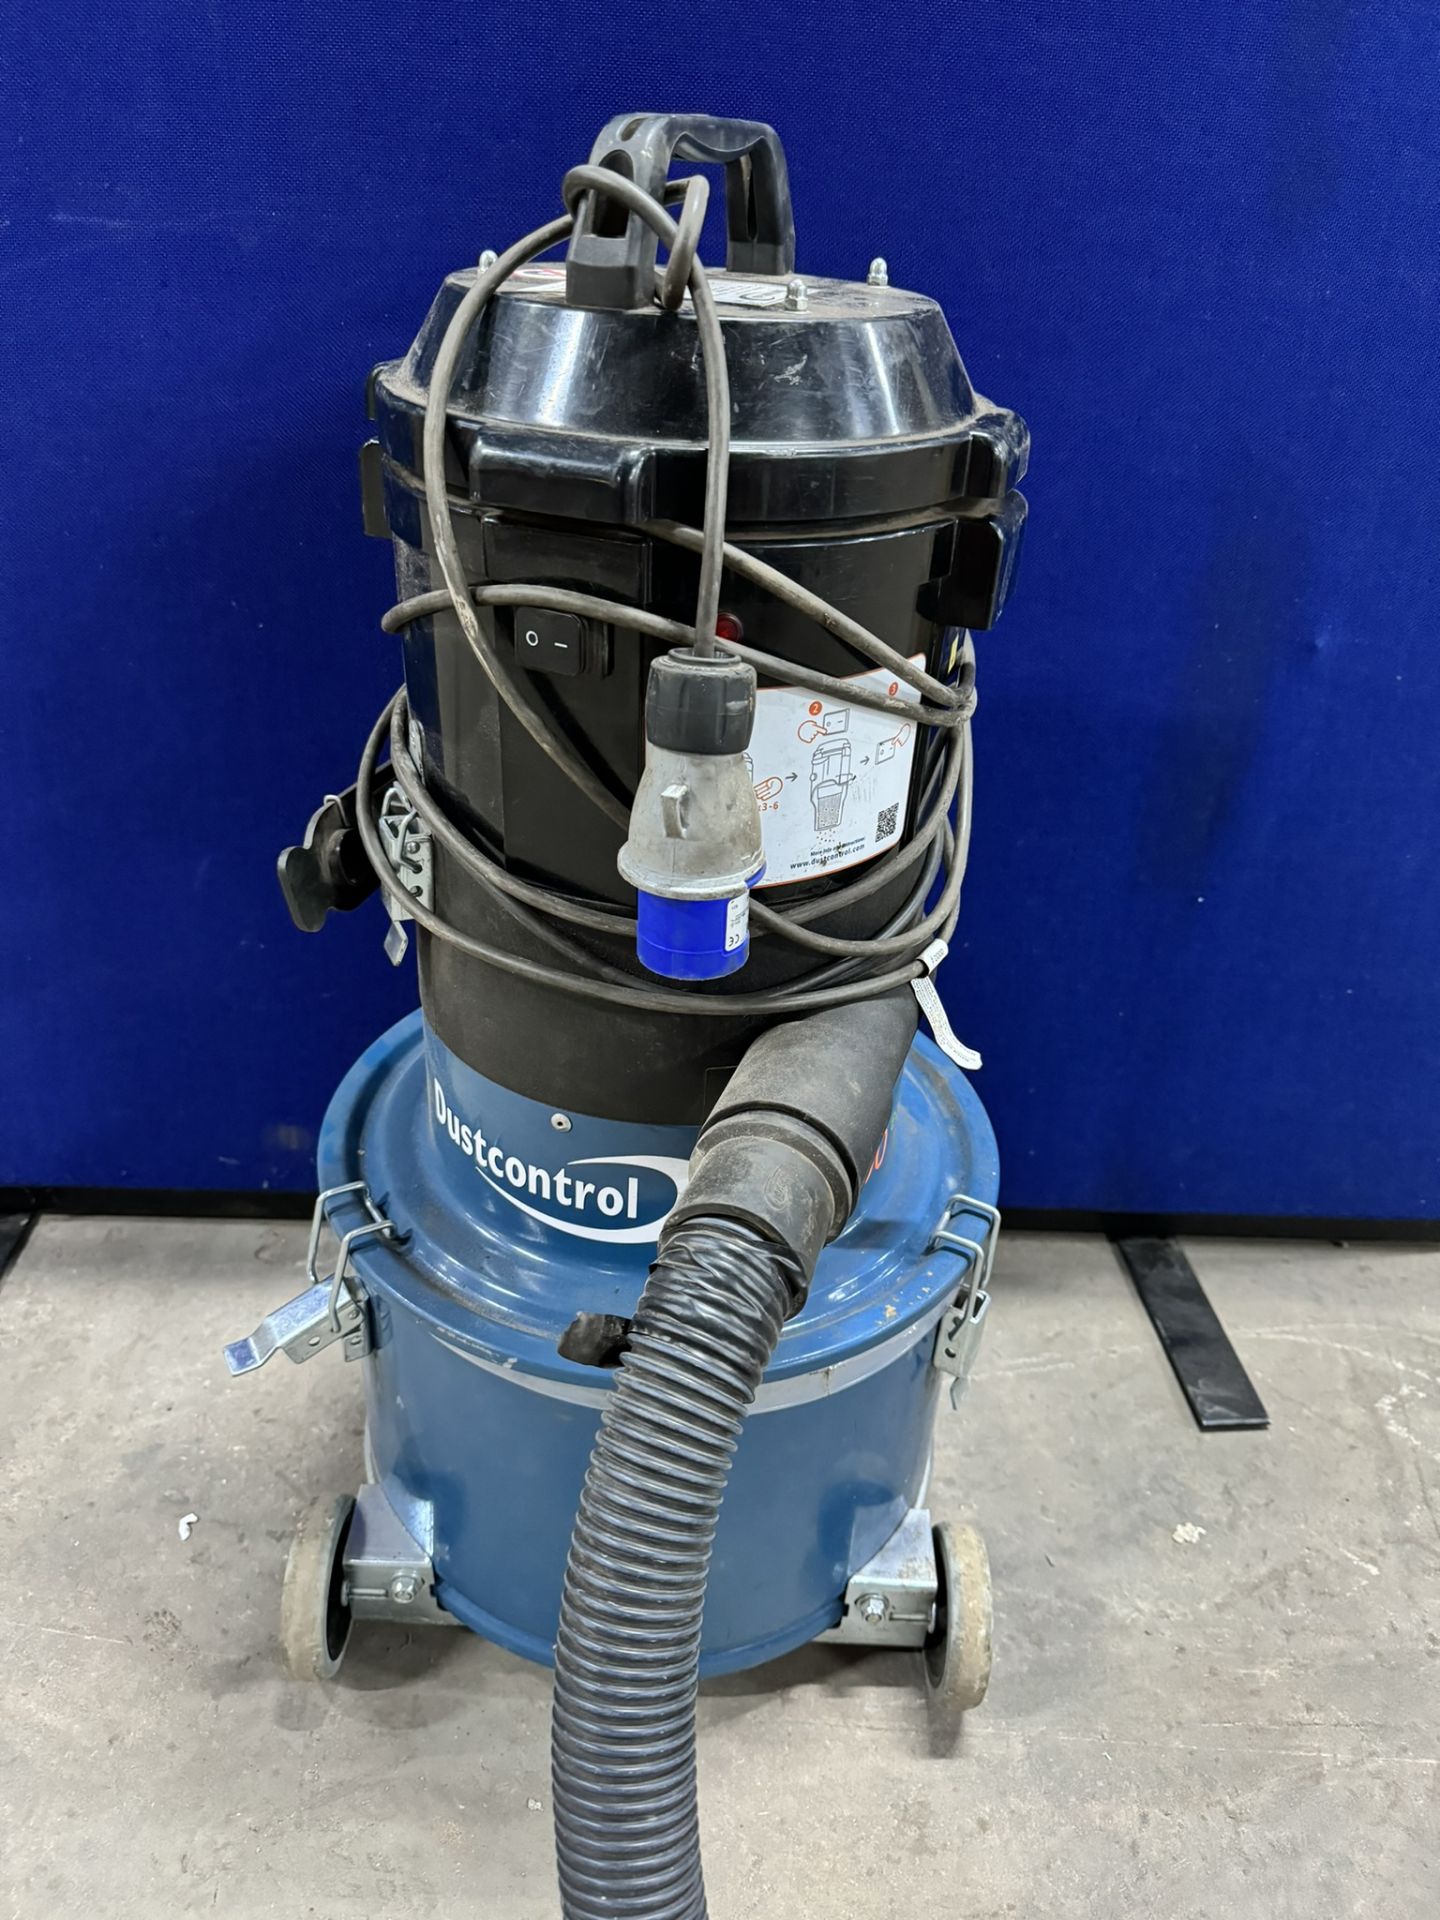 Dust Control DC1800 Mobile Dust Extractor - Image 2 of 6